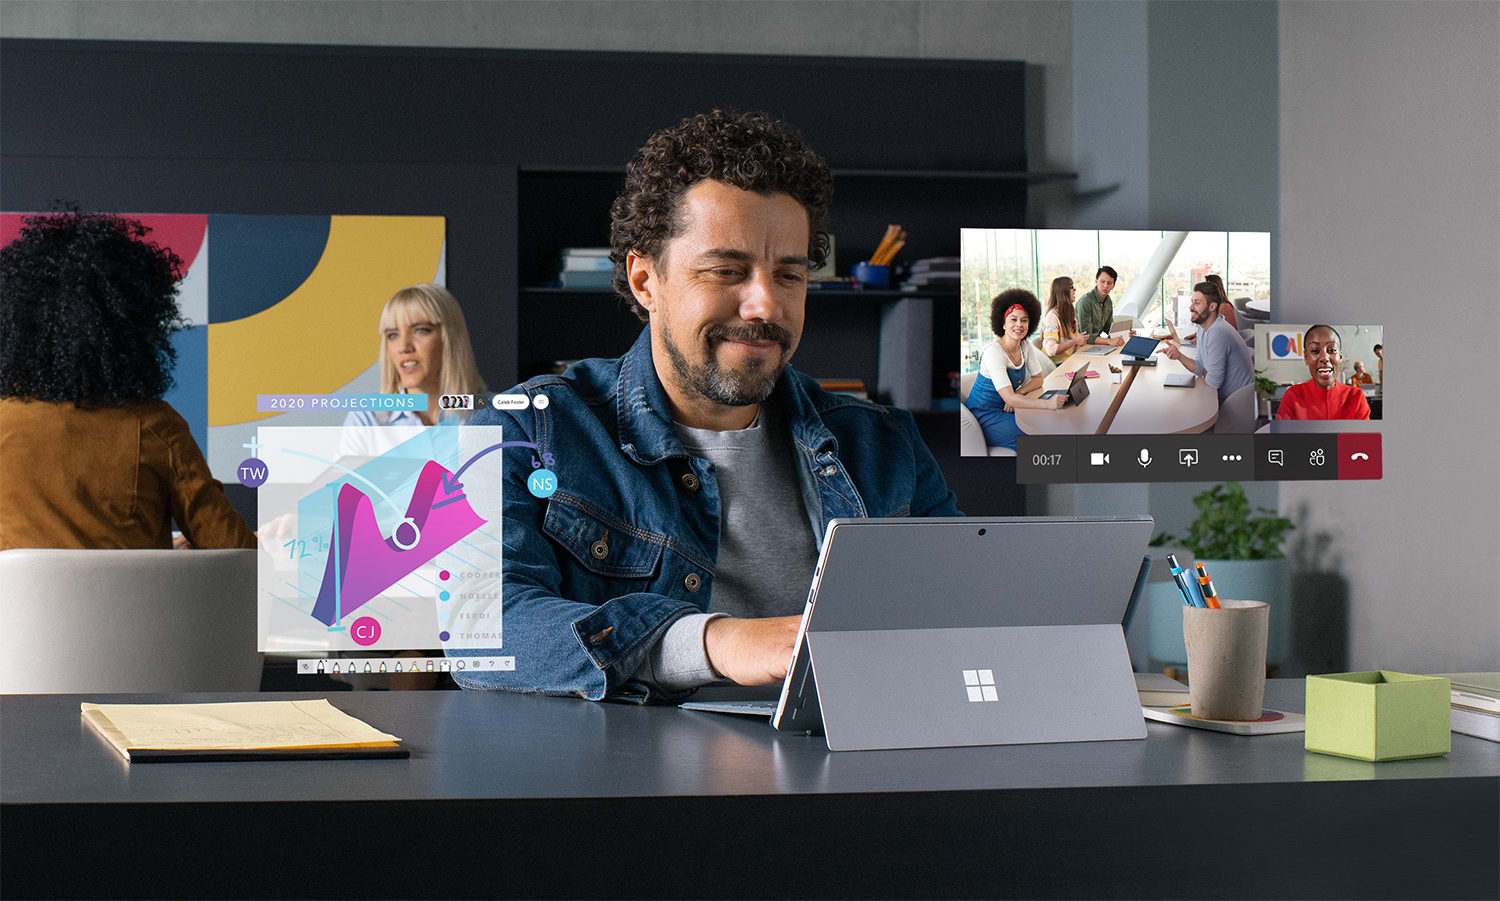 Microsoft is bringing out the big guns against Slack with new global ad campaign for Teams